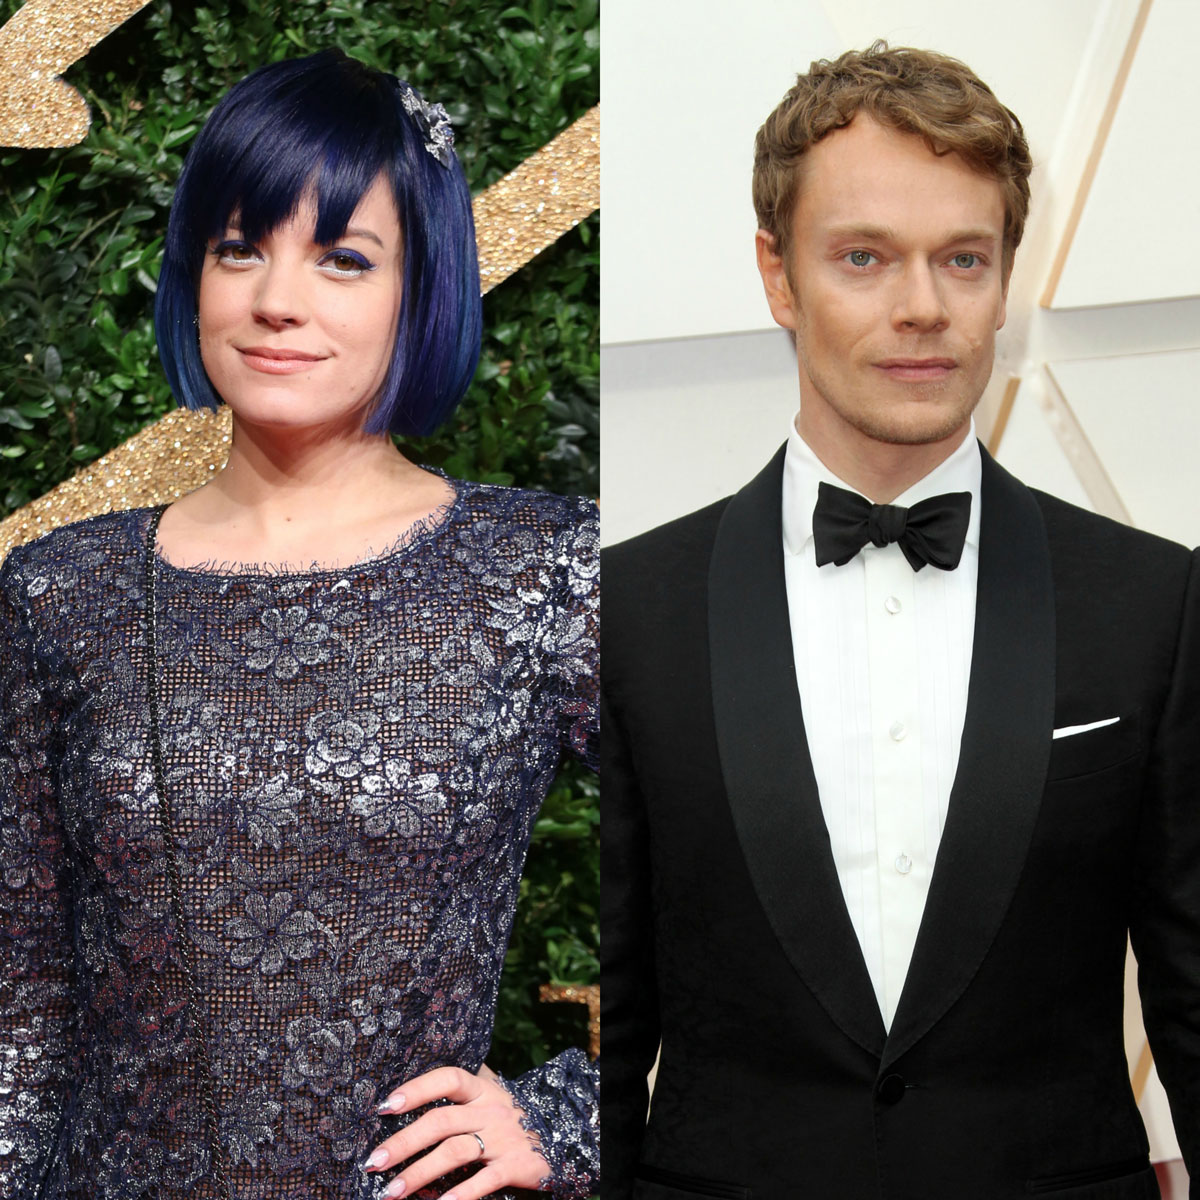 Lily Allen and Alfie Allen are related